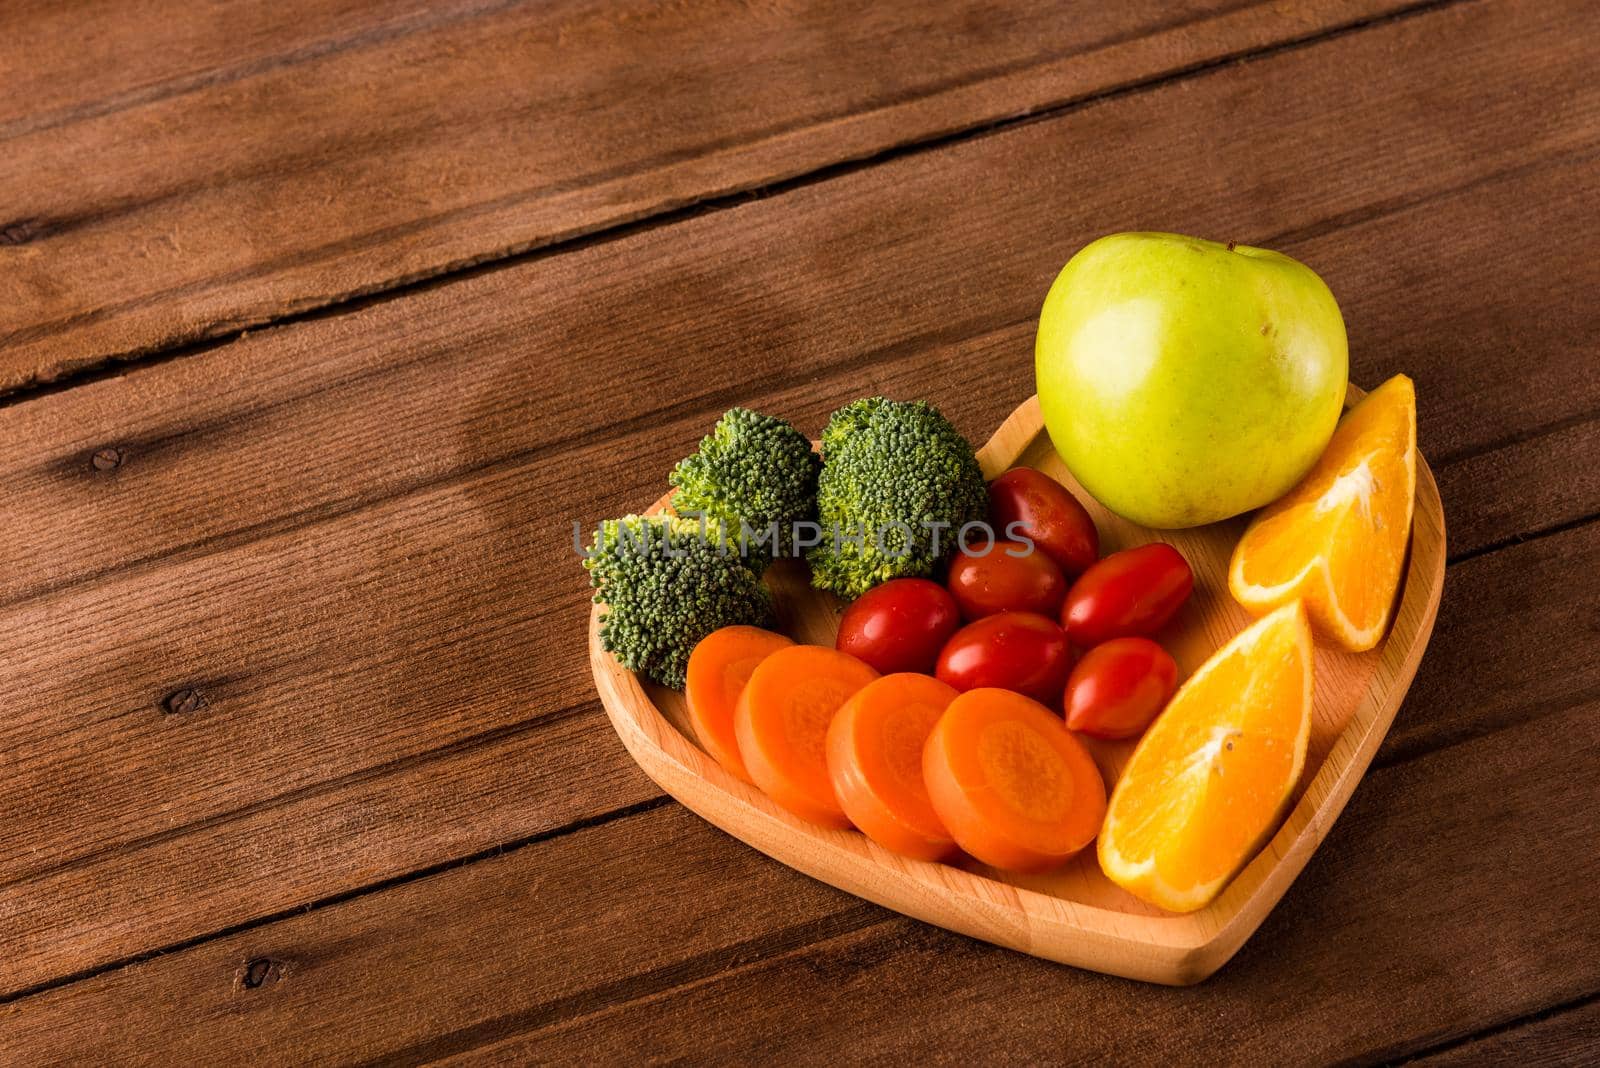 Top view of fresh organic fruits and vegetables in heart plate wood (apple, carrot, tomato, orange, broccoli) on wooden table, Healthy lifestyle diet food concept
